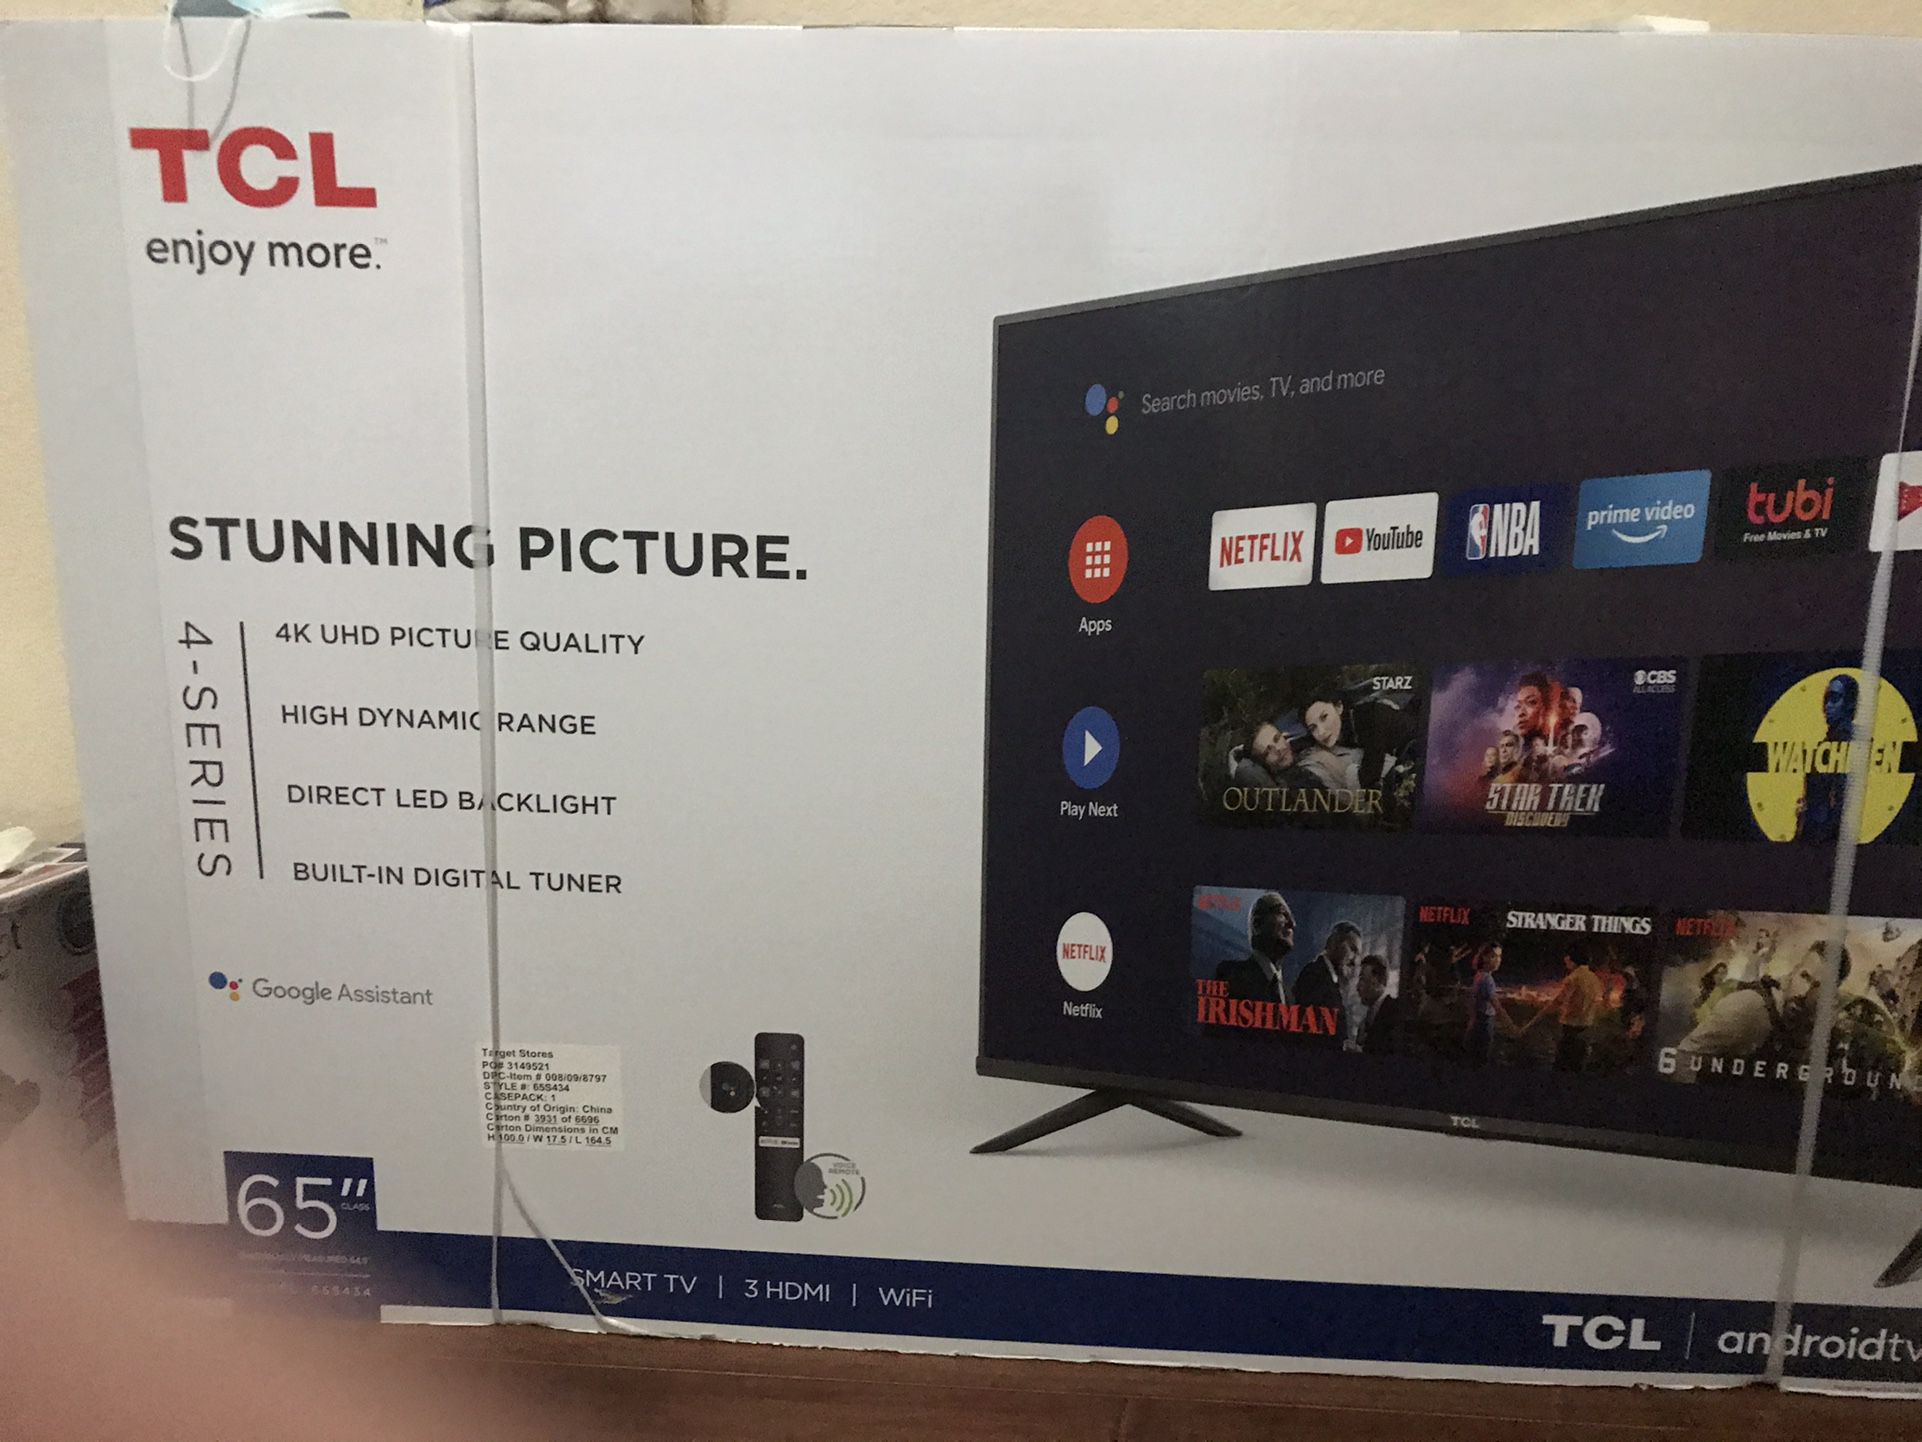 TCL 65" Class 4-Series 4K UHD HDR Smart Android TV – 65S434